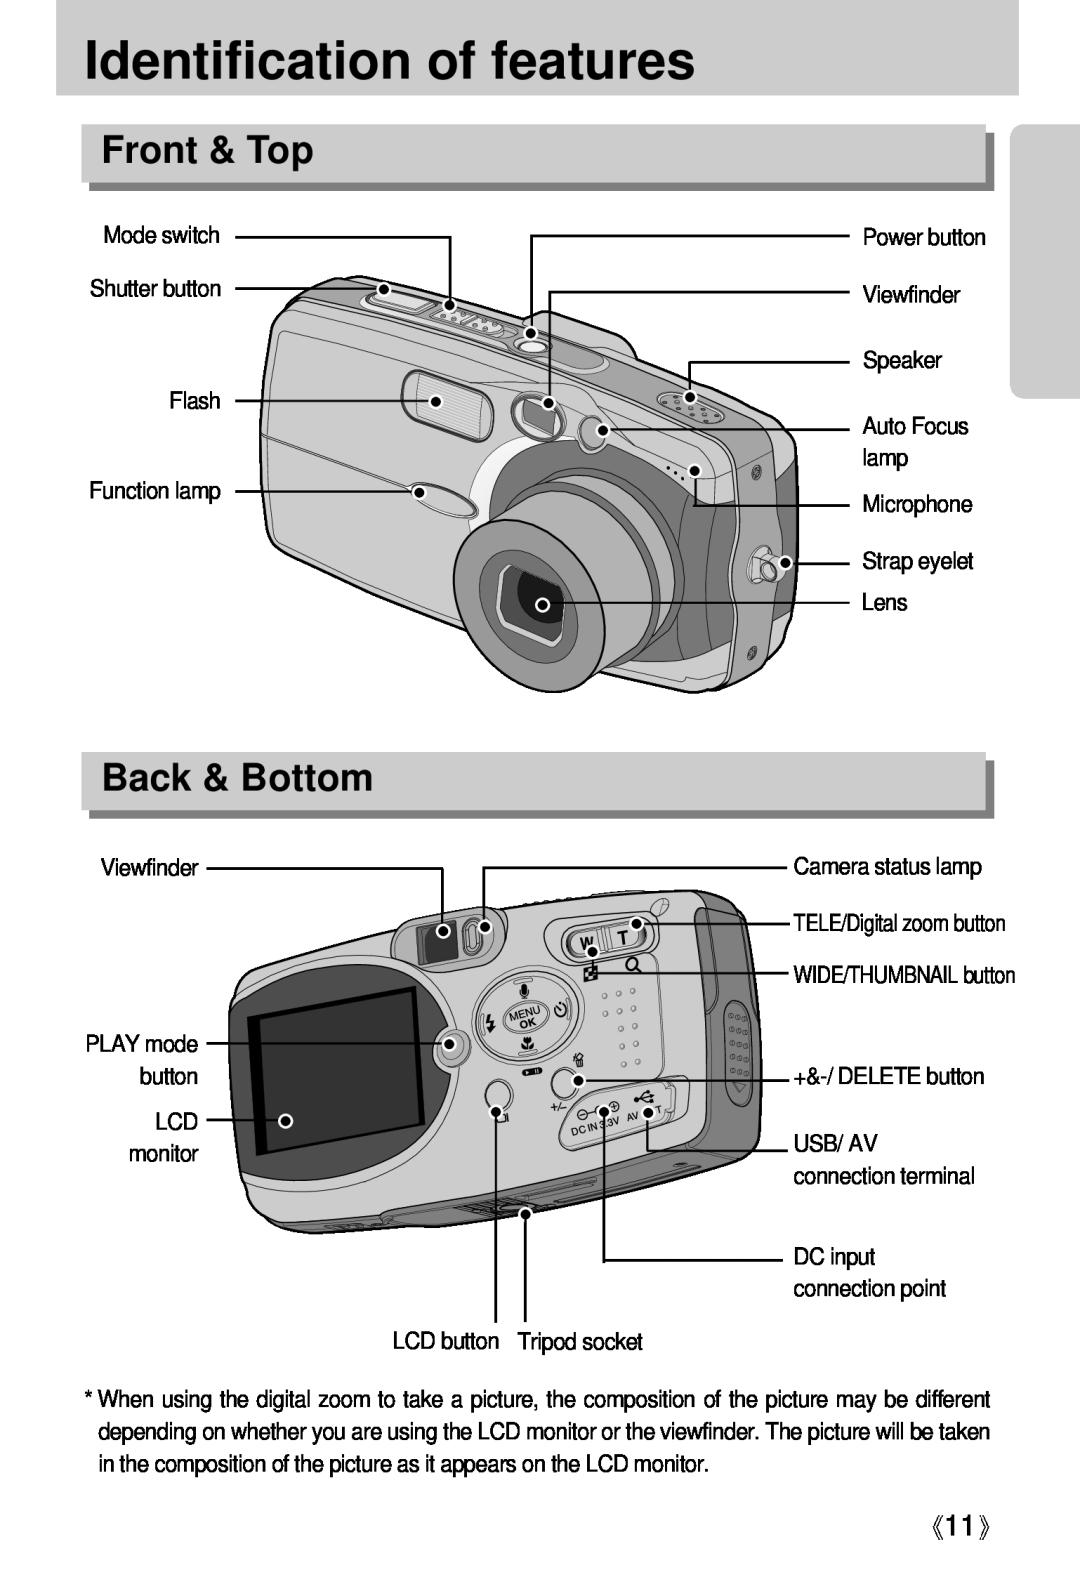 Samsung Digimax U-CA user manual Identification of features, Front & Top, Back & Bottom 